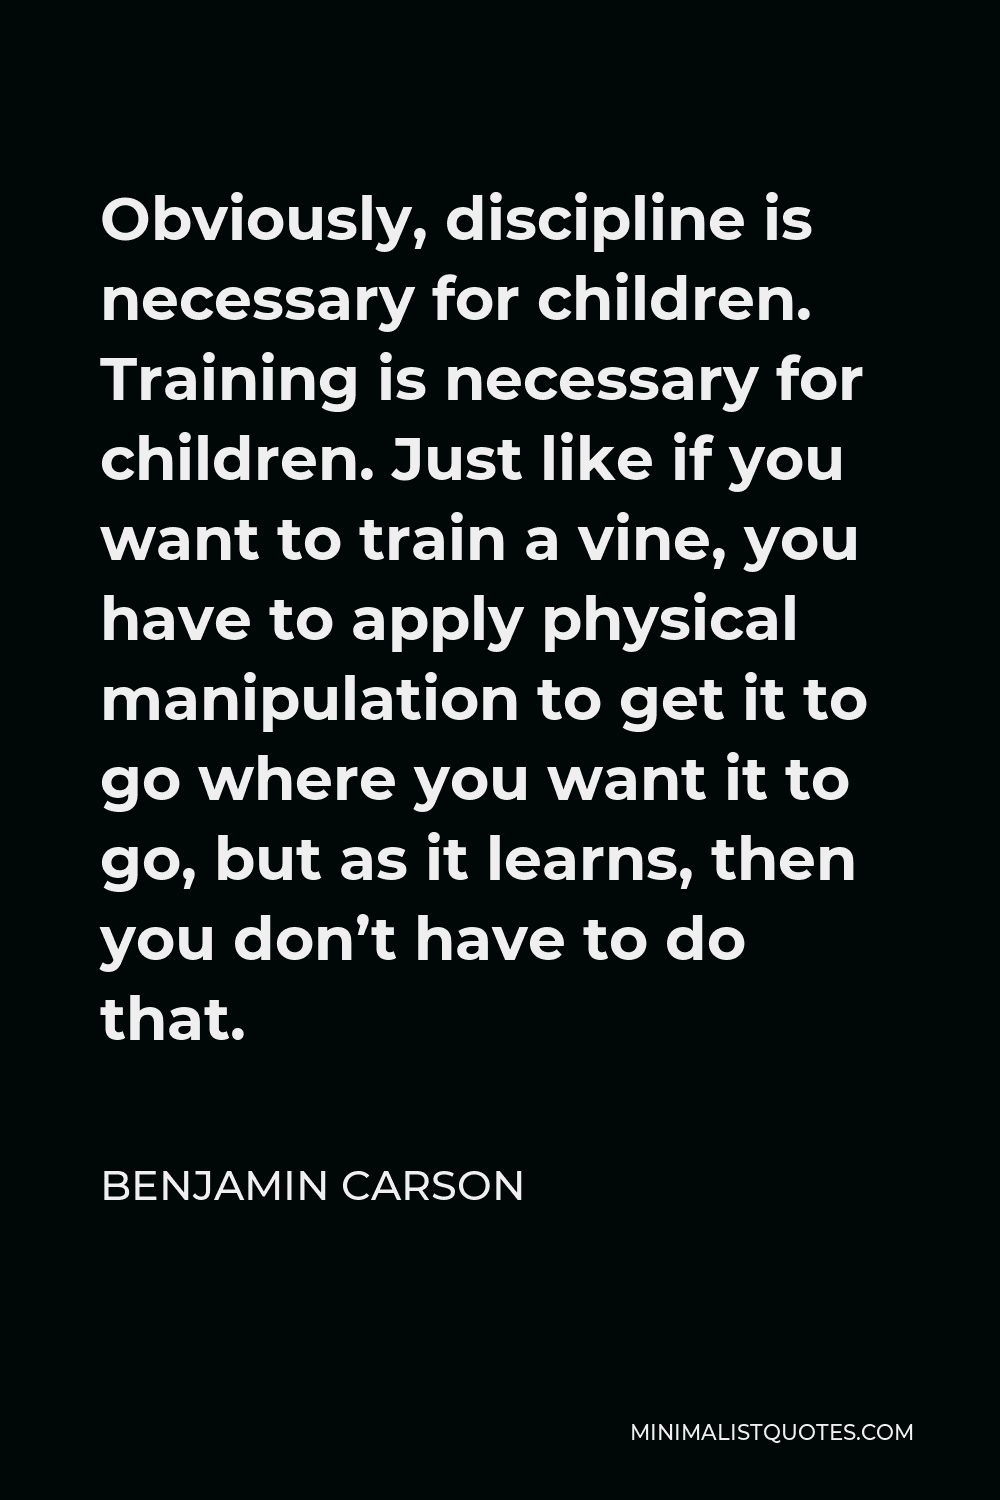 Benjamin Carson Quote - Obviously, discipline is necessary for children. Training is necessary for children. Just like if you want to train a vine, you have to apply physical manipulation to get it to go where you want it to go, but as it learns, then you don’t have to do that.